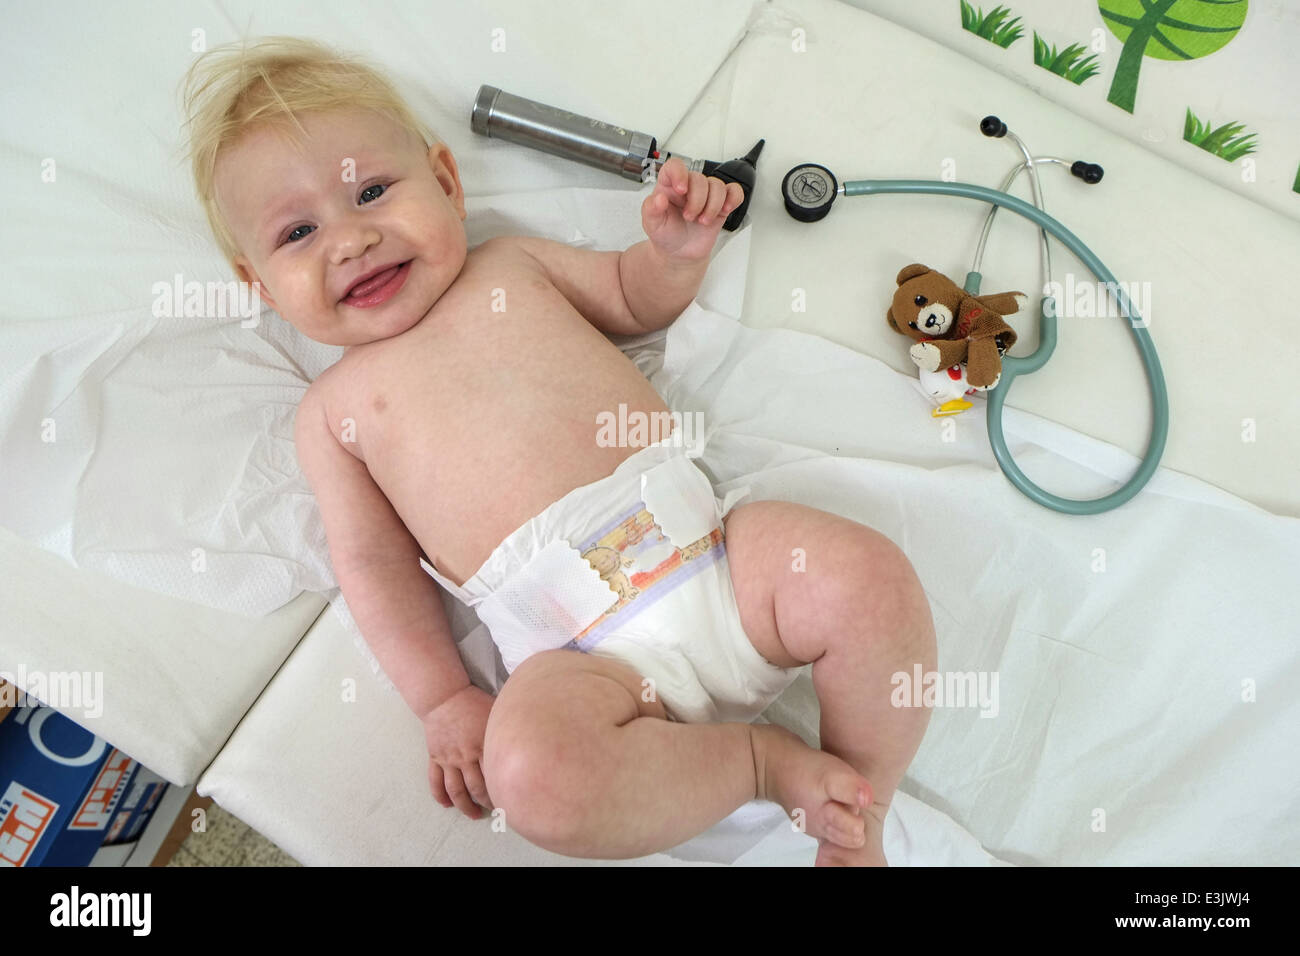 A happy and relaxed baby at a routine visit at the doctor Stock Photo